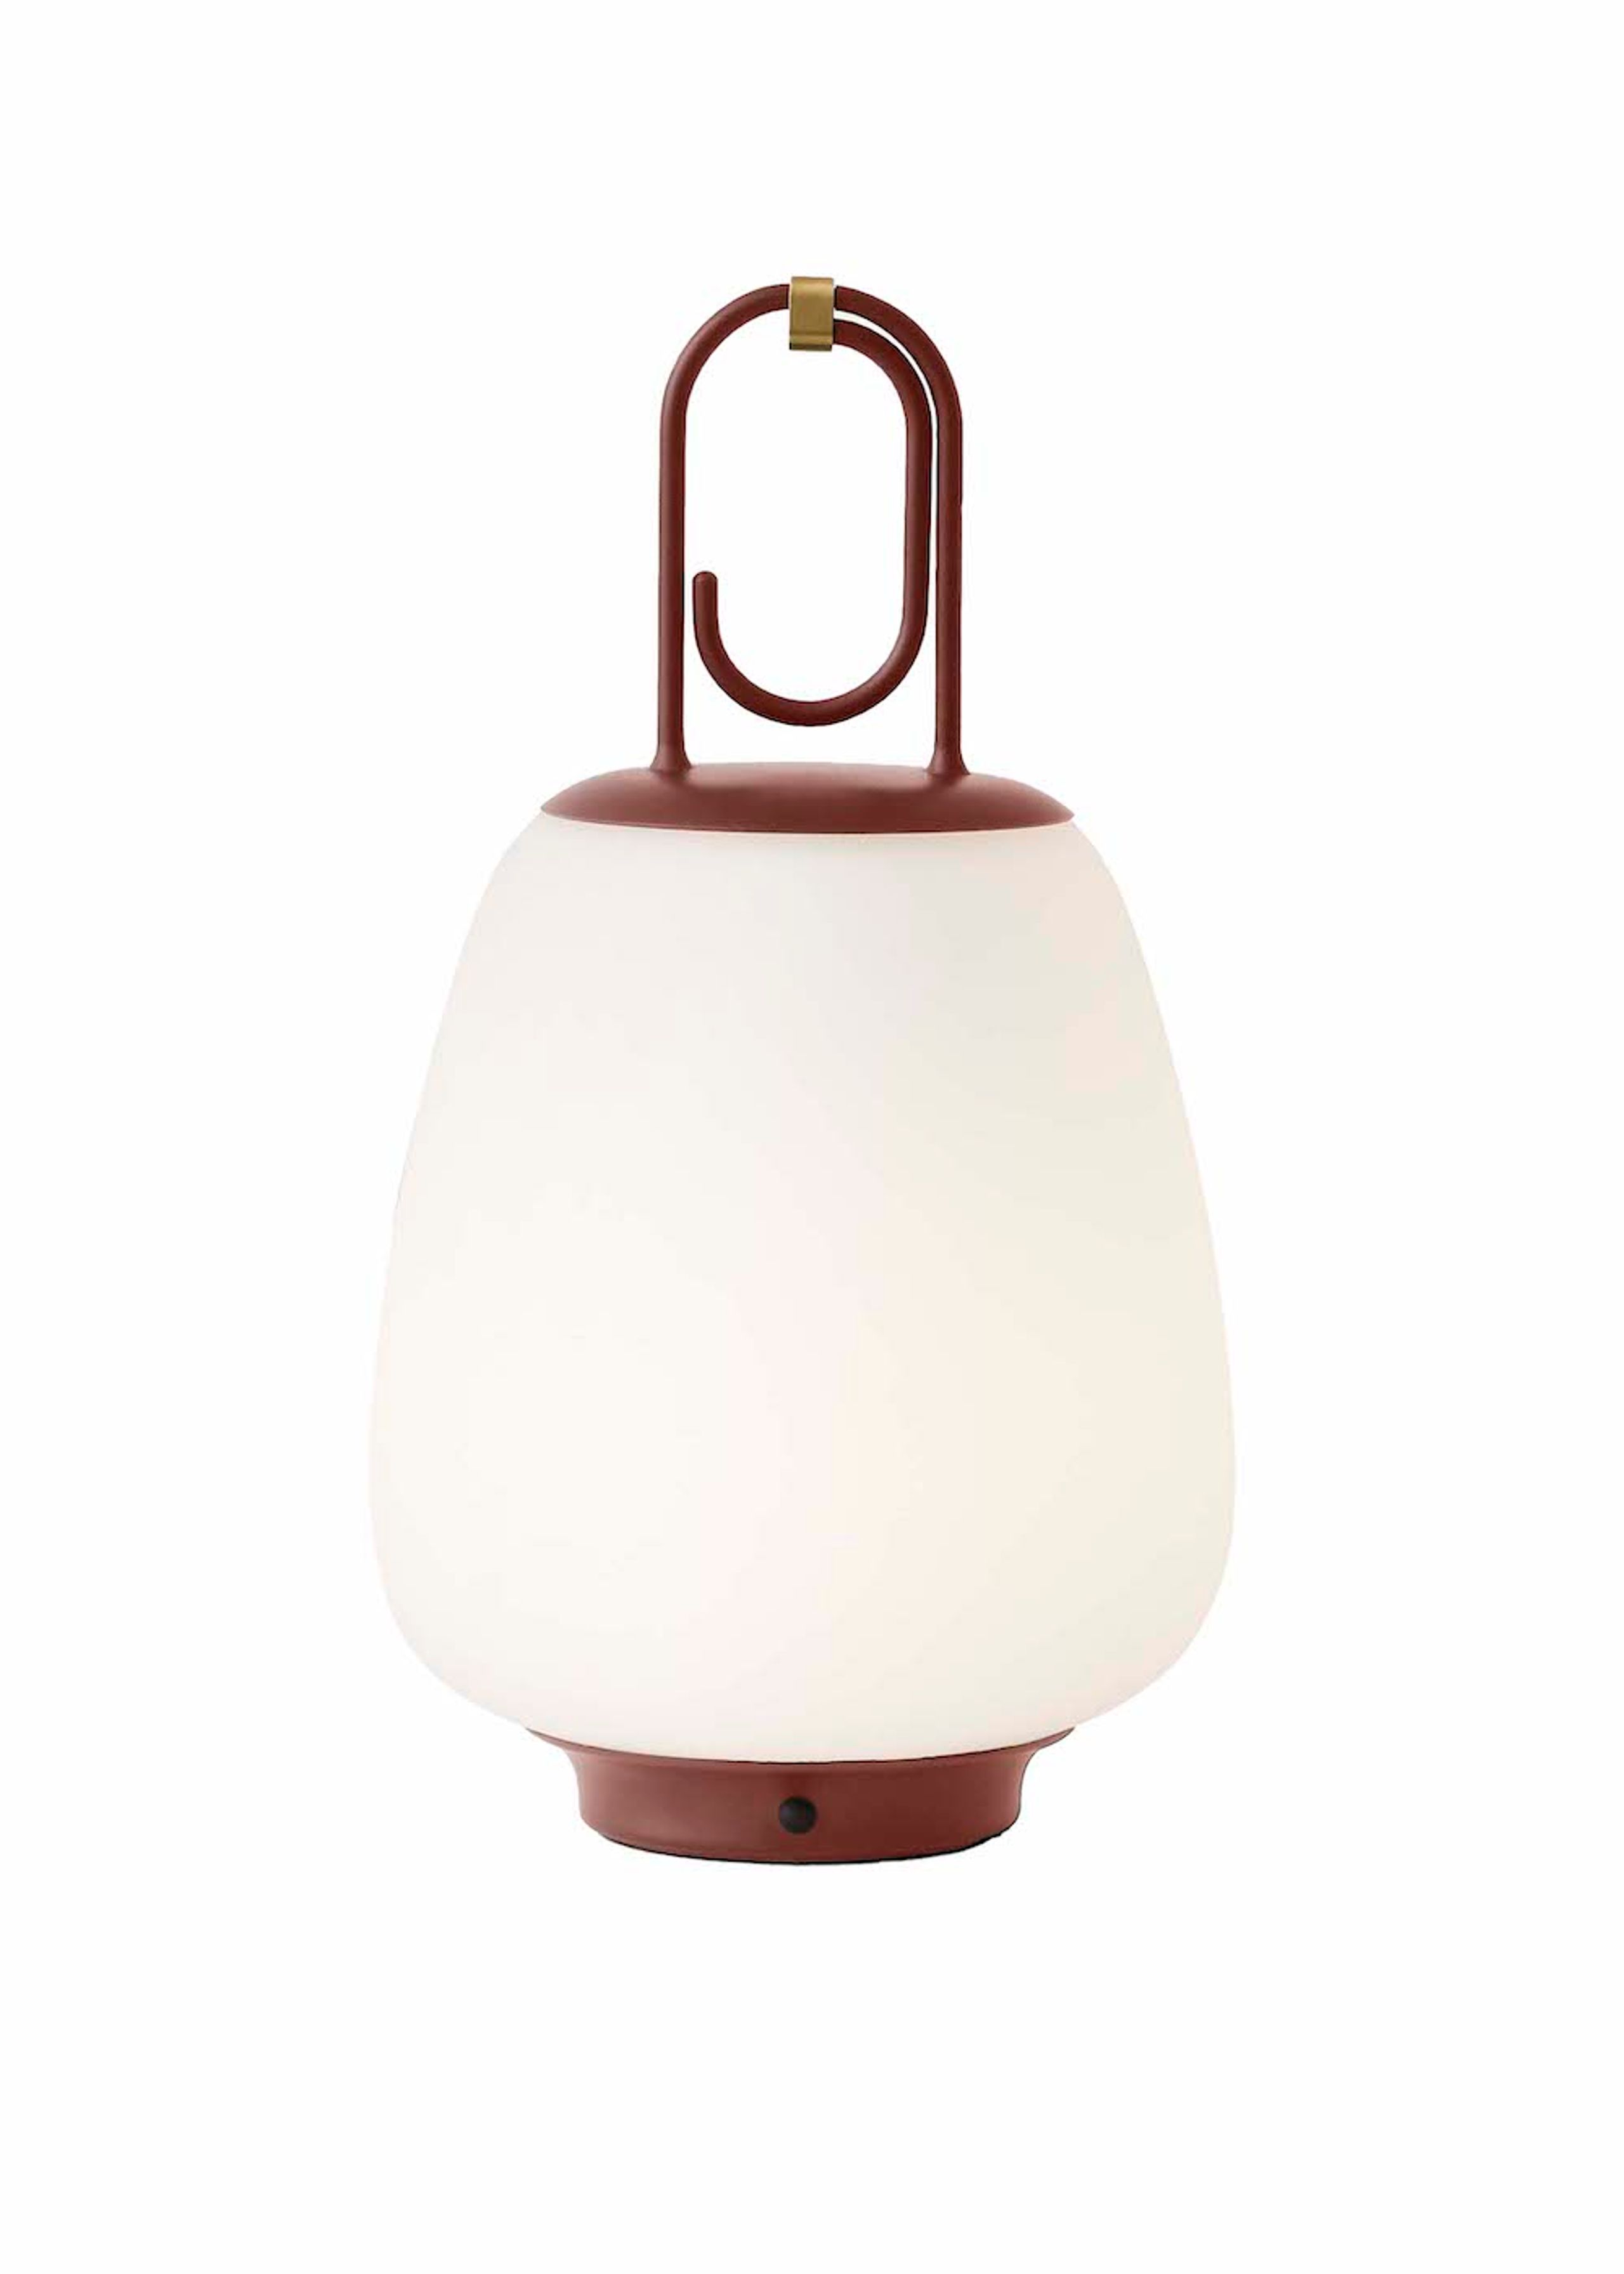 &tradition - Lampe de table - Lucca - SC51 - Maroon / Opal